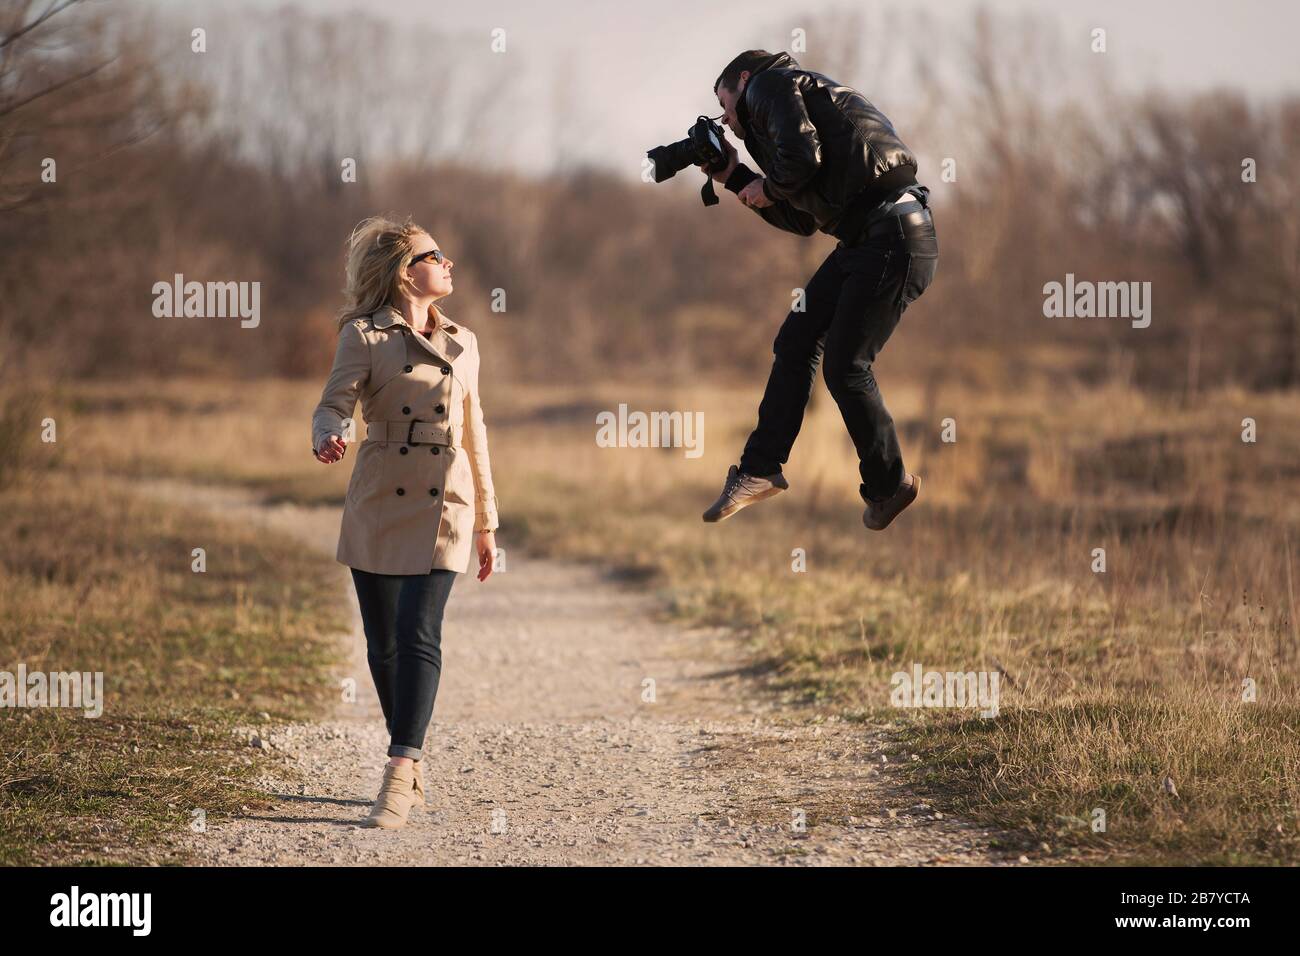 athletic photographer jumping to capture photo of young woman Stock Photo